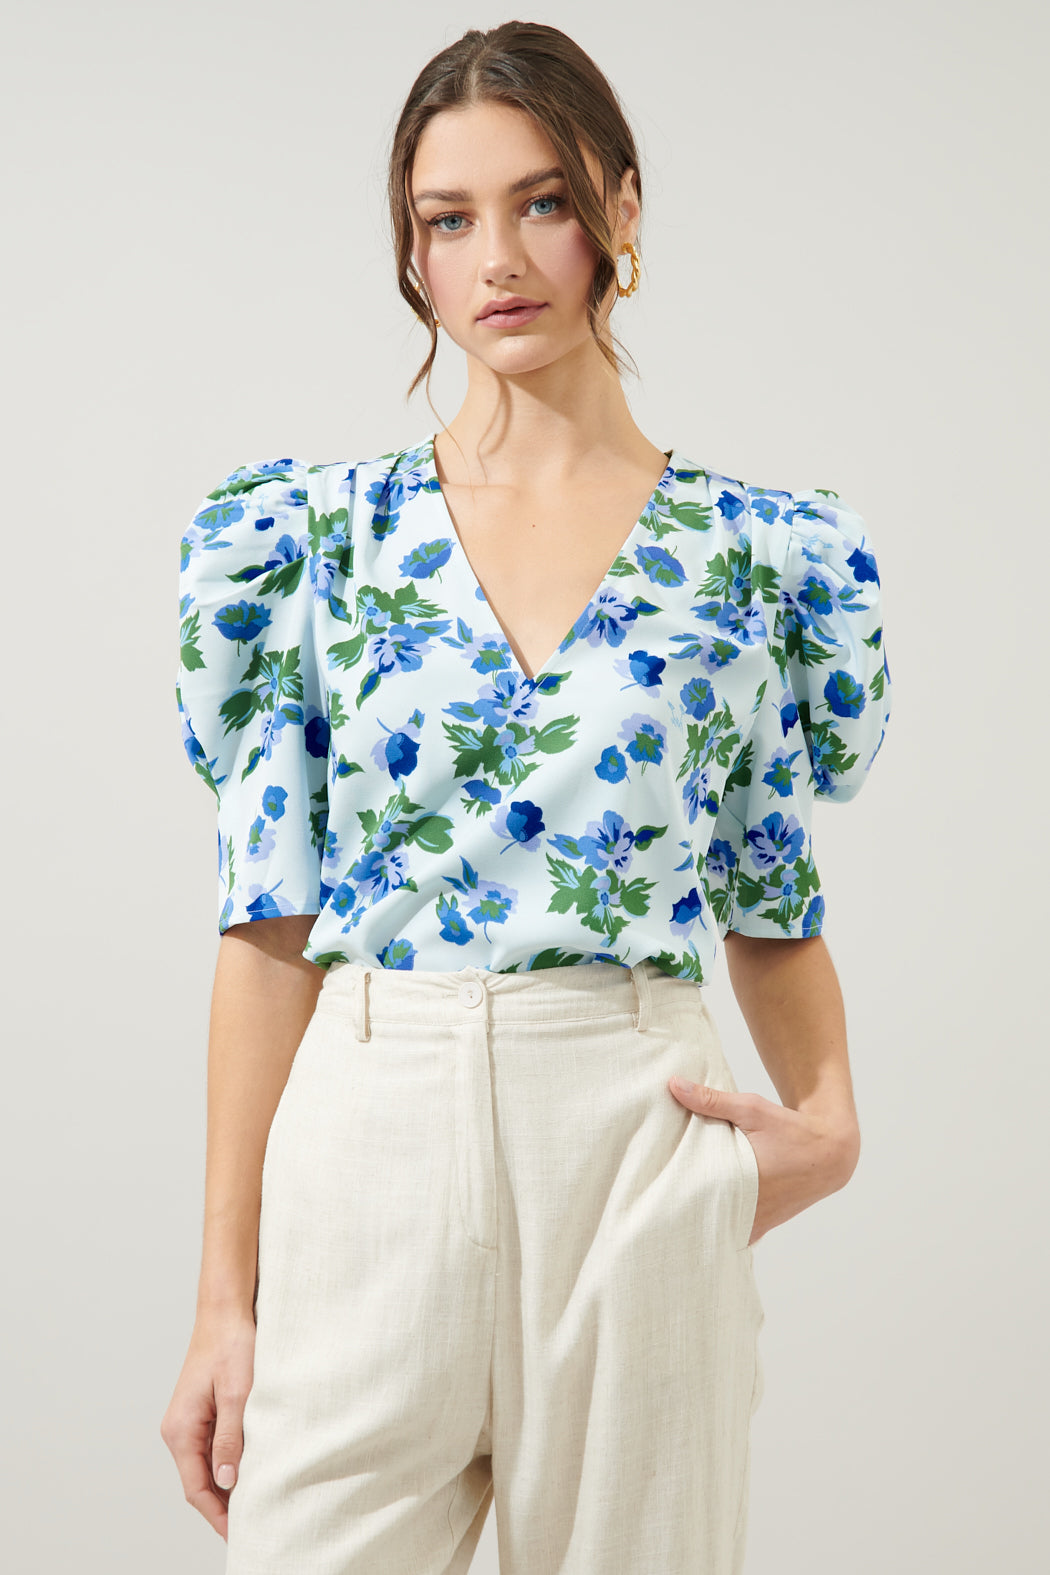 Magnolis Floral Change of Heart Puff Sleeve Blouse BLUE-GREEN-FLORAL / S by Sugarlips